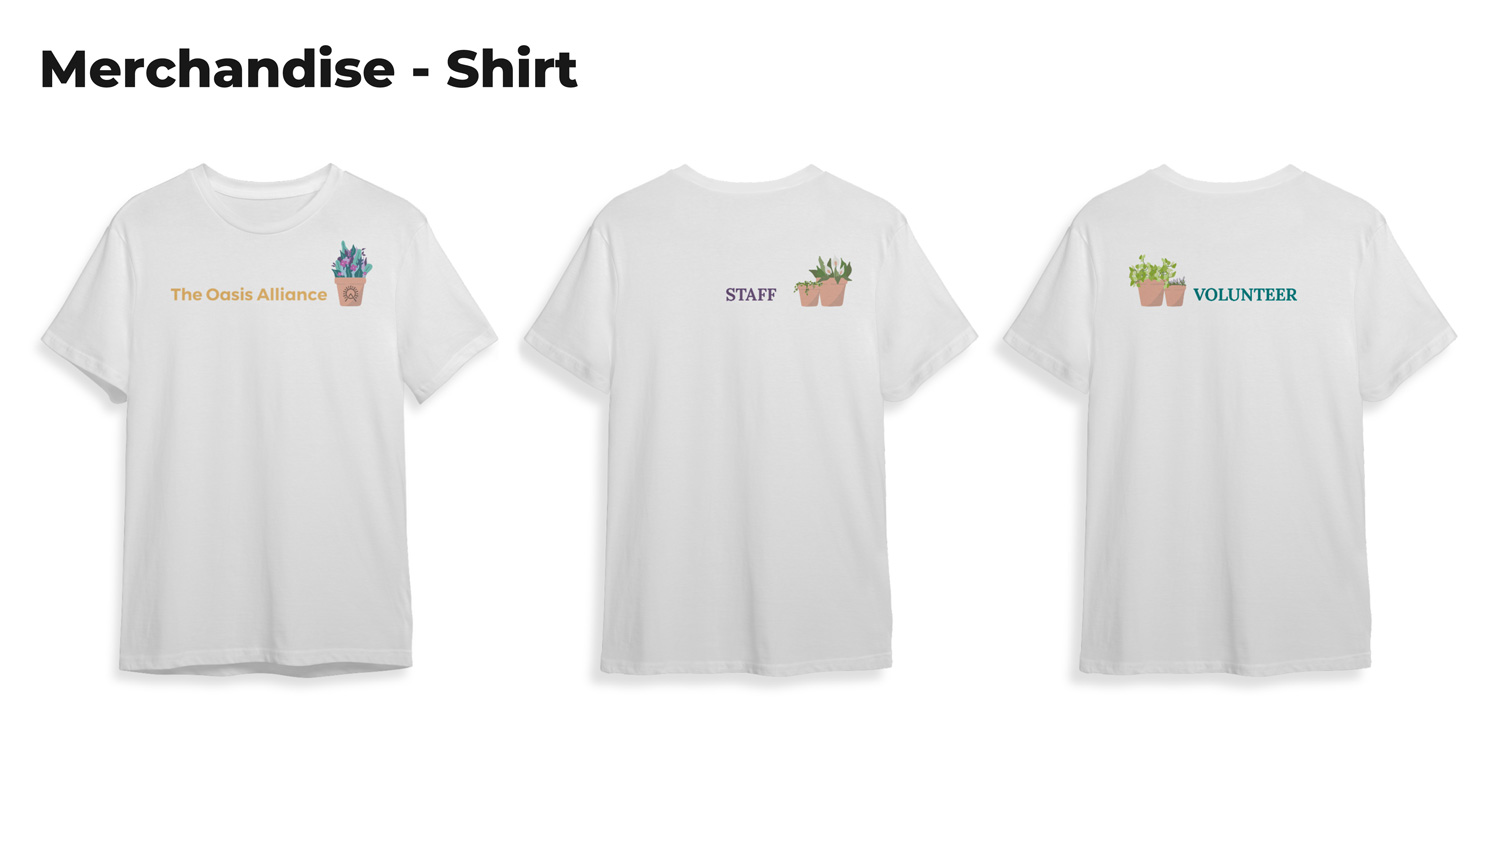 Merchandise tee-shirt design of The Oasis Alliance on front and either Staff or Volunteer on back with potted plant.